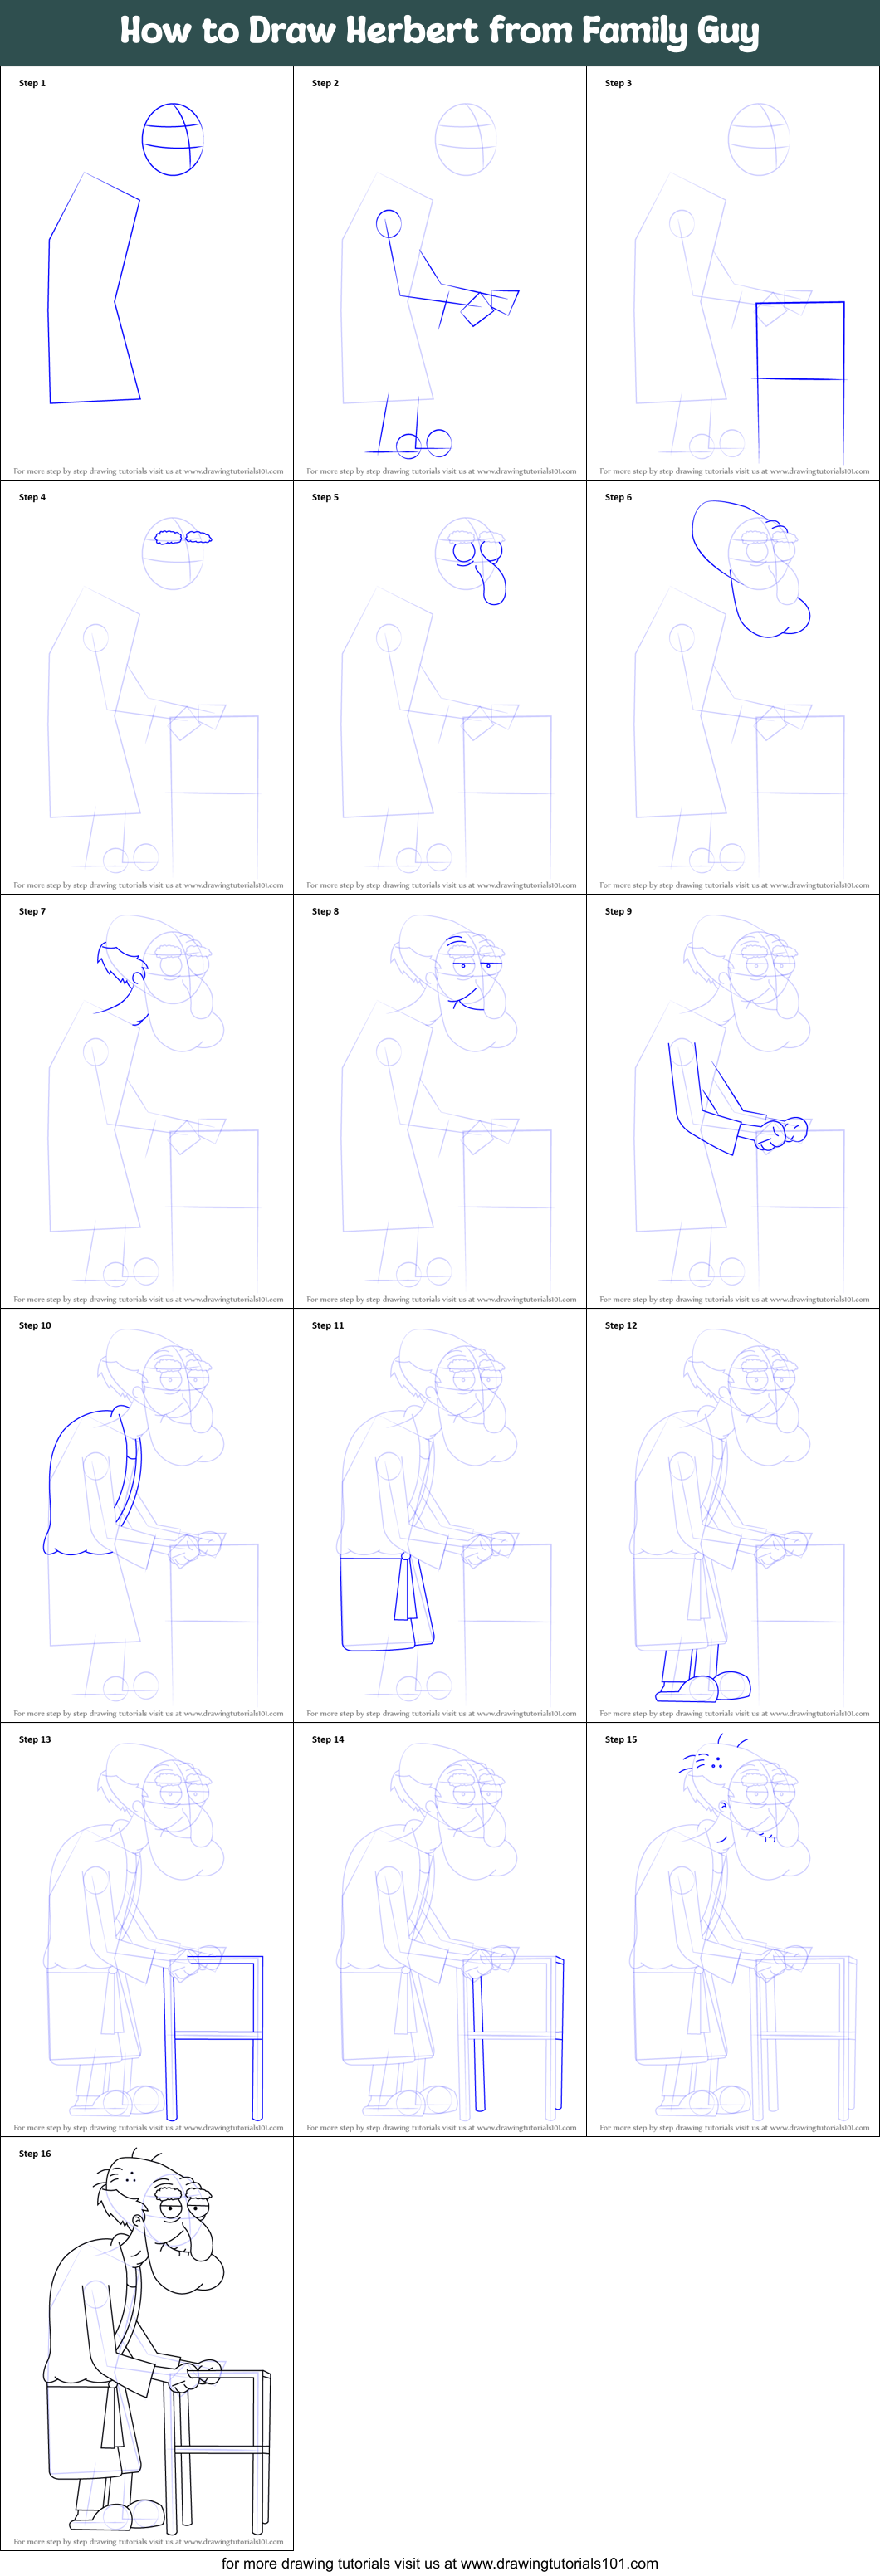 How to Draw Herbert from Family Guy printable step by step drawing